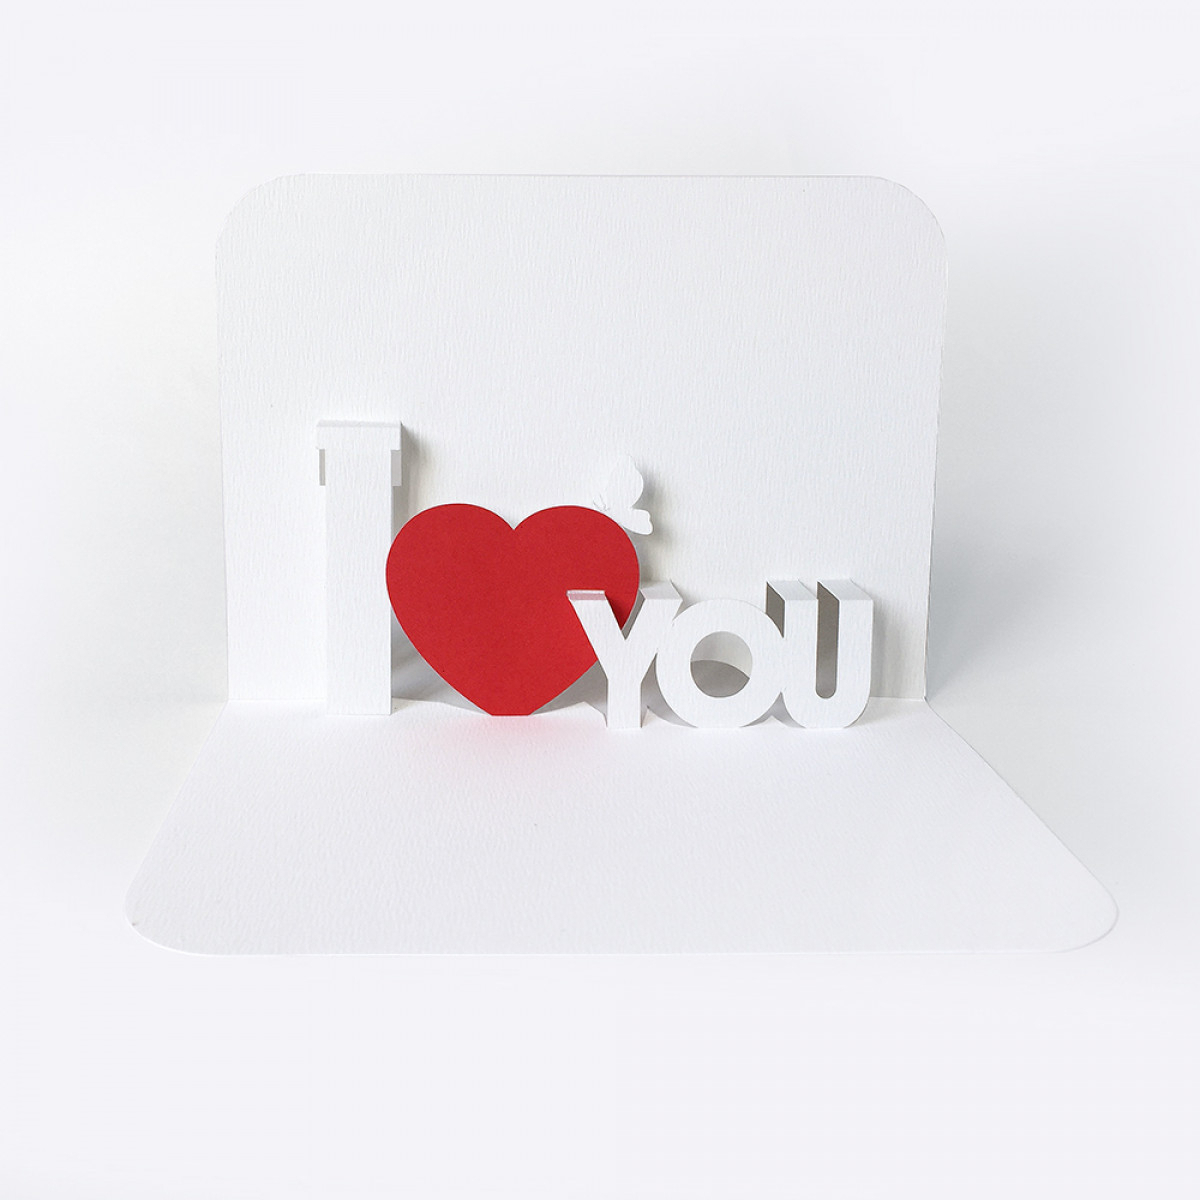 90 Deg Templates In I Love You Pop Up Card Template Throughout I Love You Pop Up Card Template